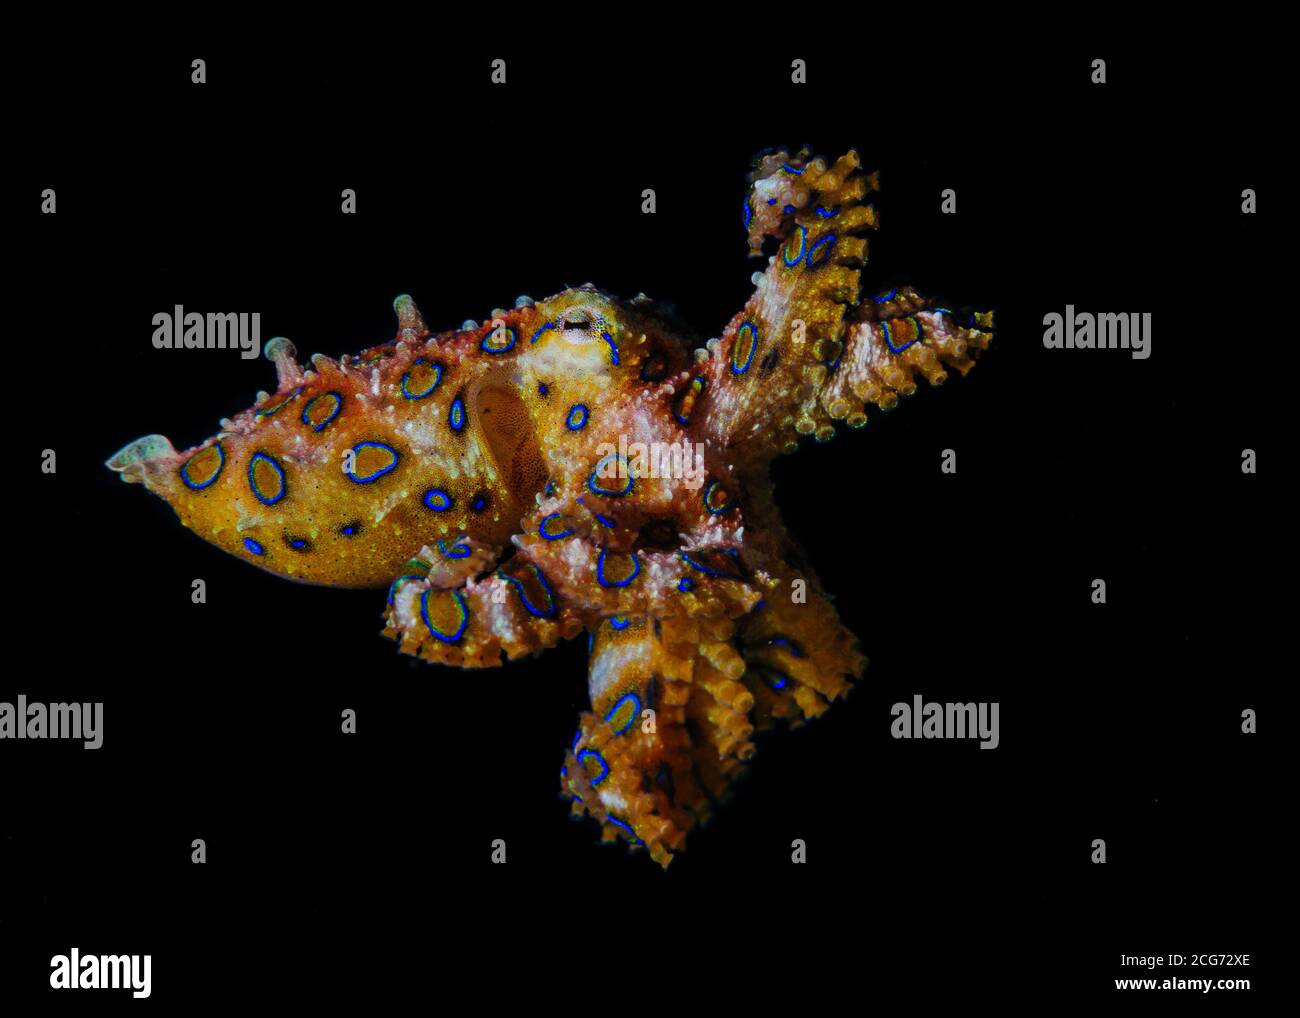 Blue ringed Octopus attacking, Lembeh Strait, Indonesia Stock Photo